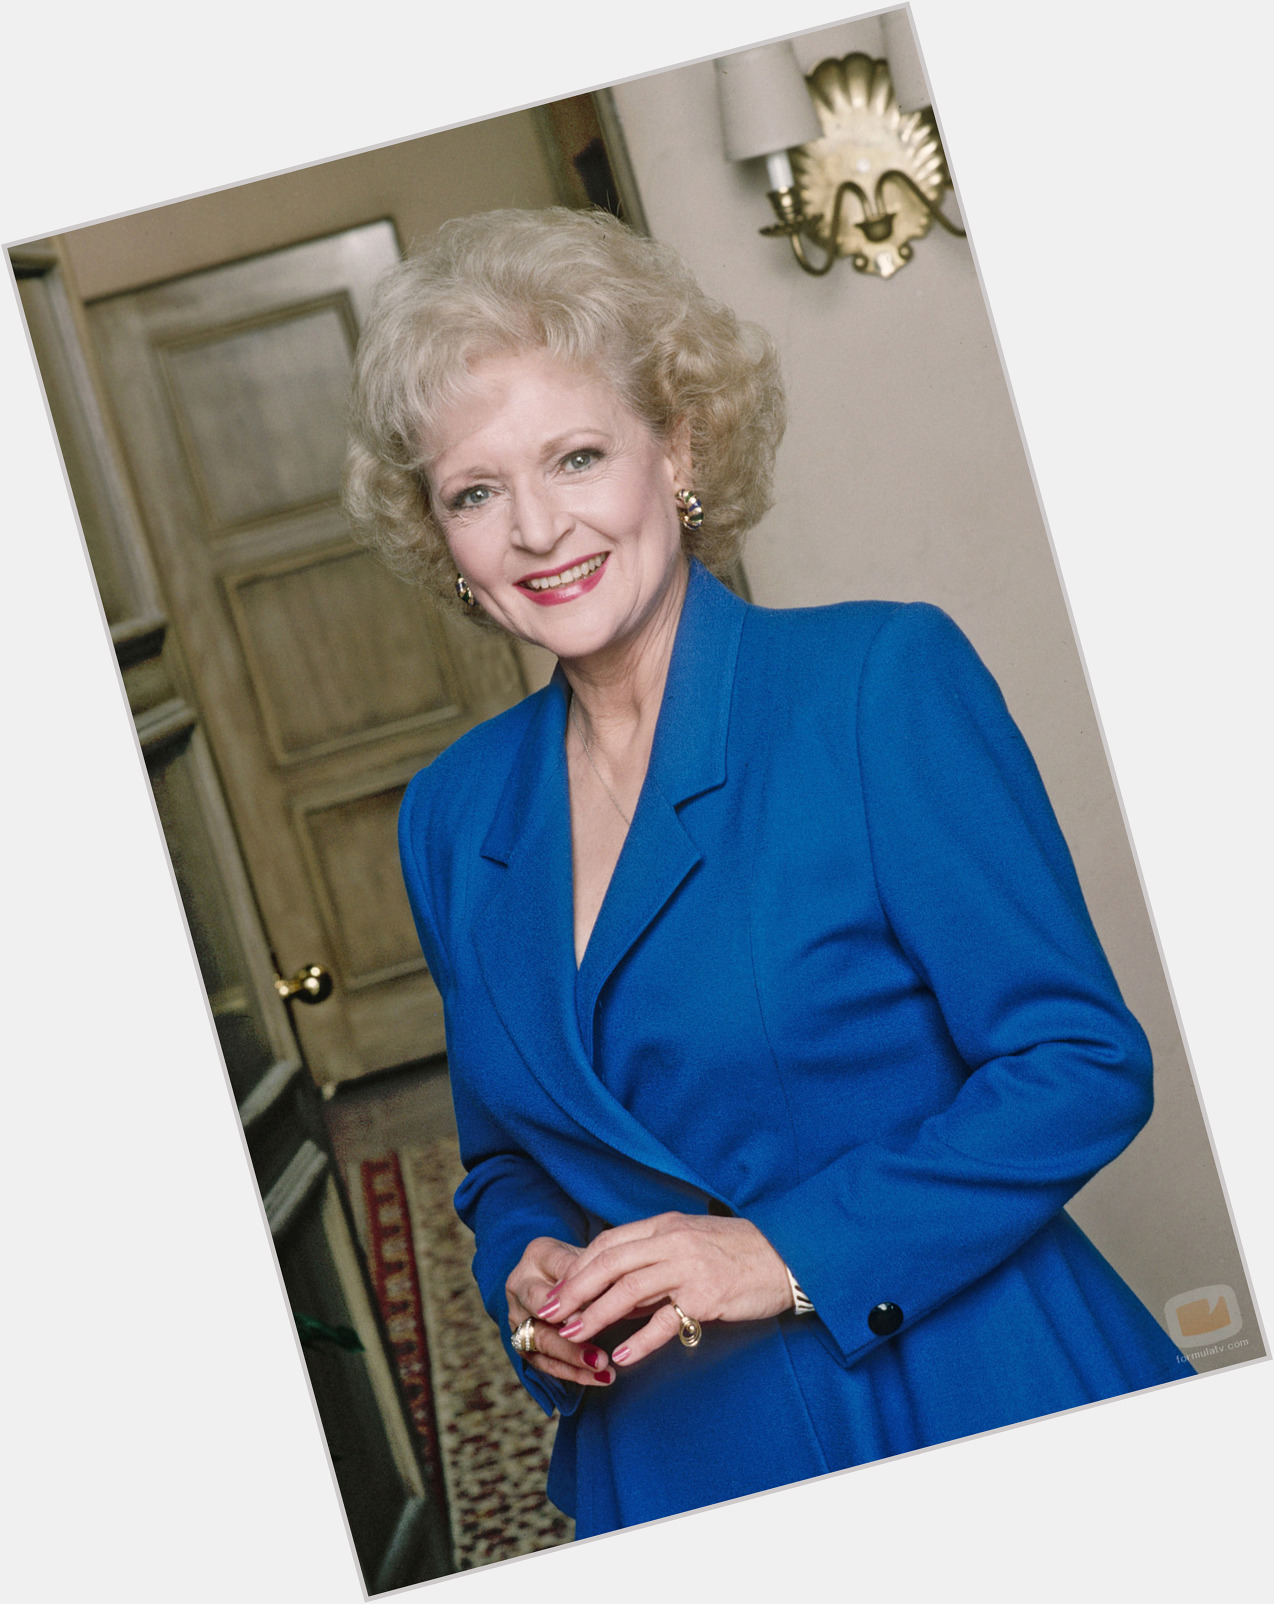 <a href="/hot-women/rose-nylund/where-dating-news-photos">Rose Nylund</a> Slim body,  grey hair & hairstyles